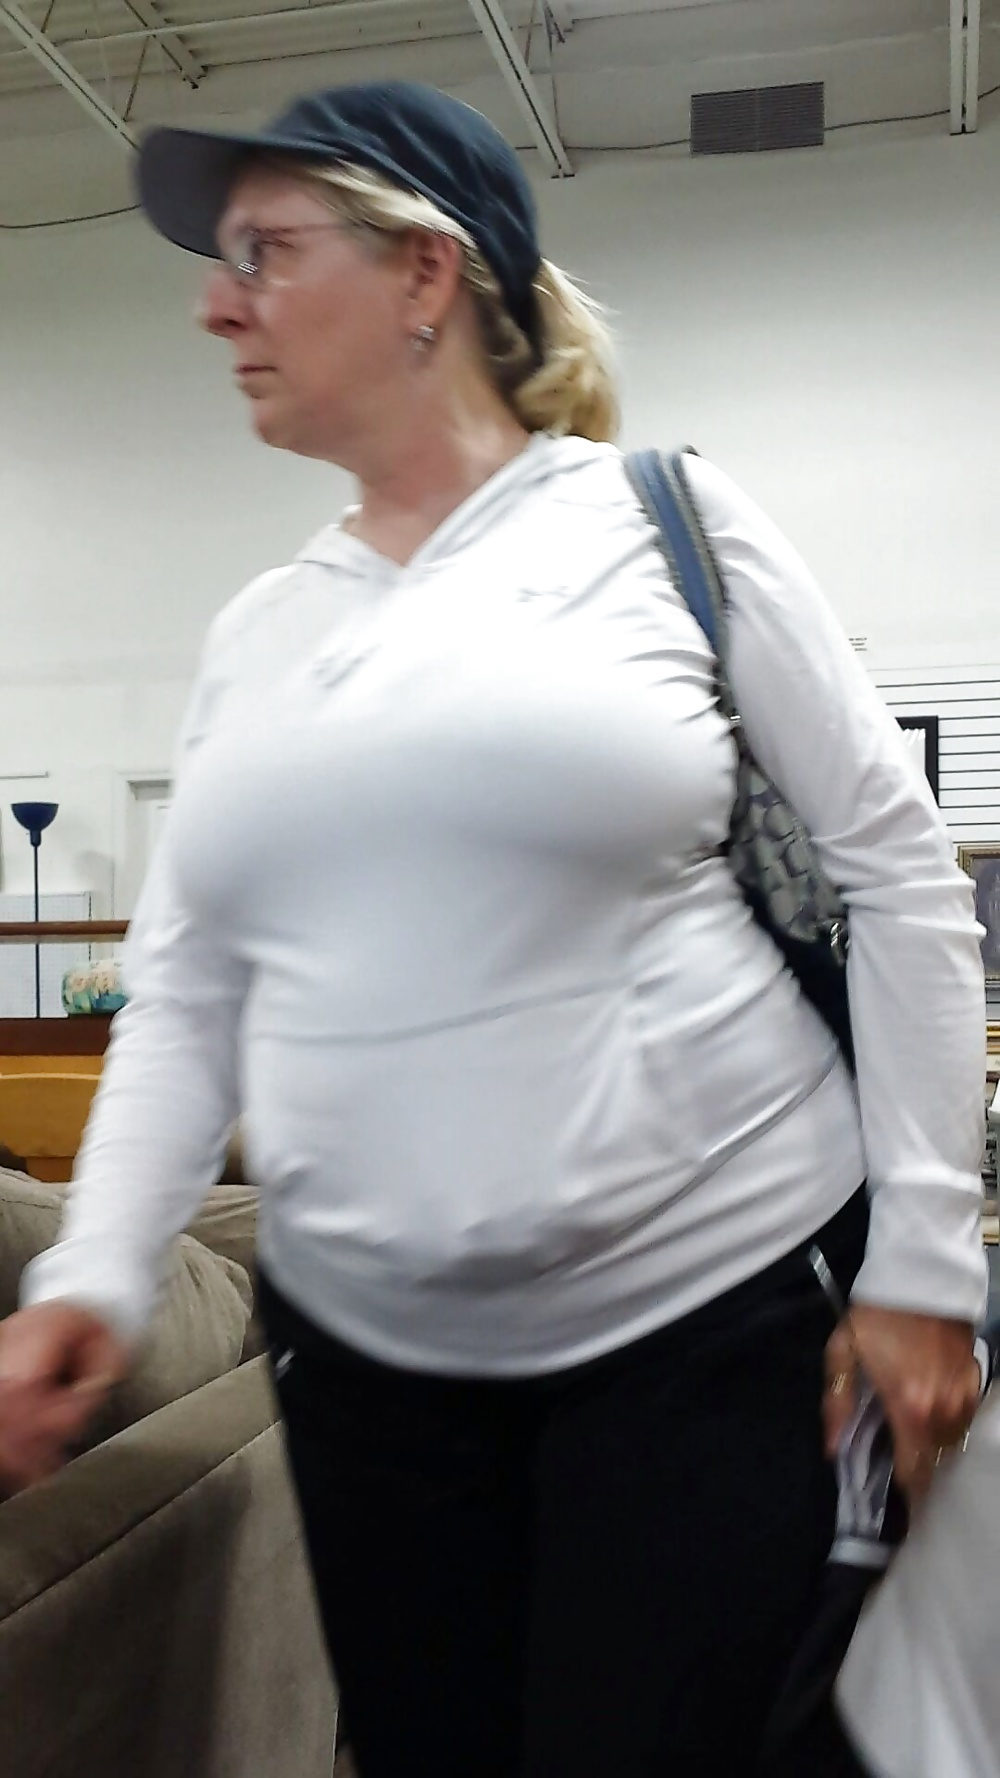 Candid mature big boobs shopping in tight top - 4 Pics ...